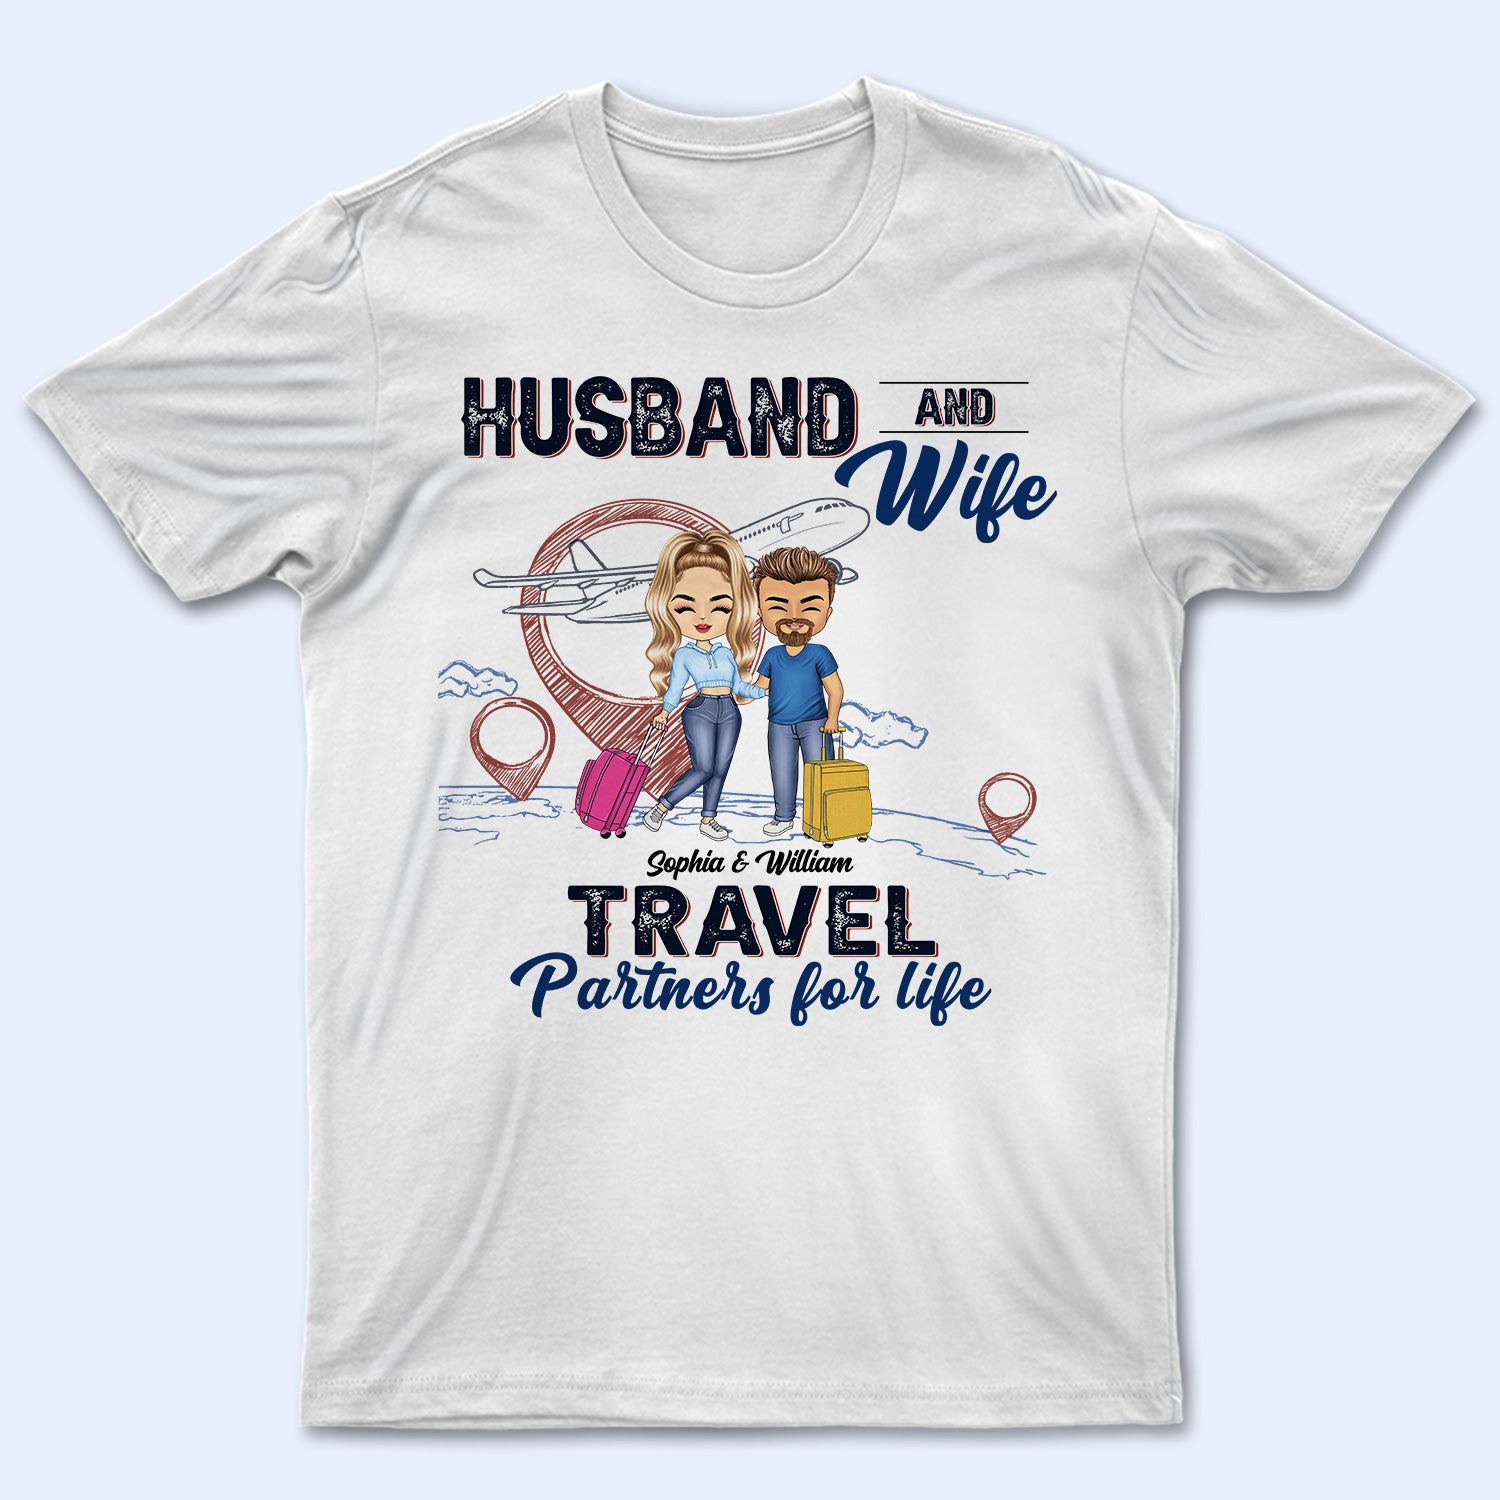 Husband & Wife Travel Partners For Life - Birthday, Anniversary Gift For Travel Couples - Personalized T Shirt